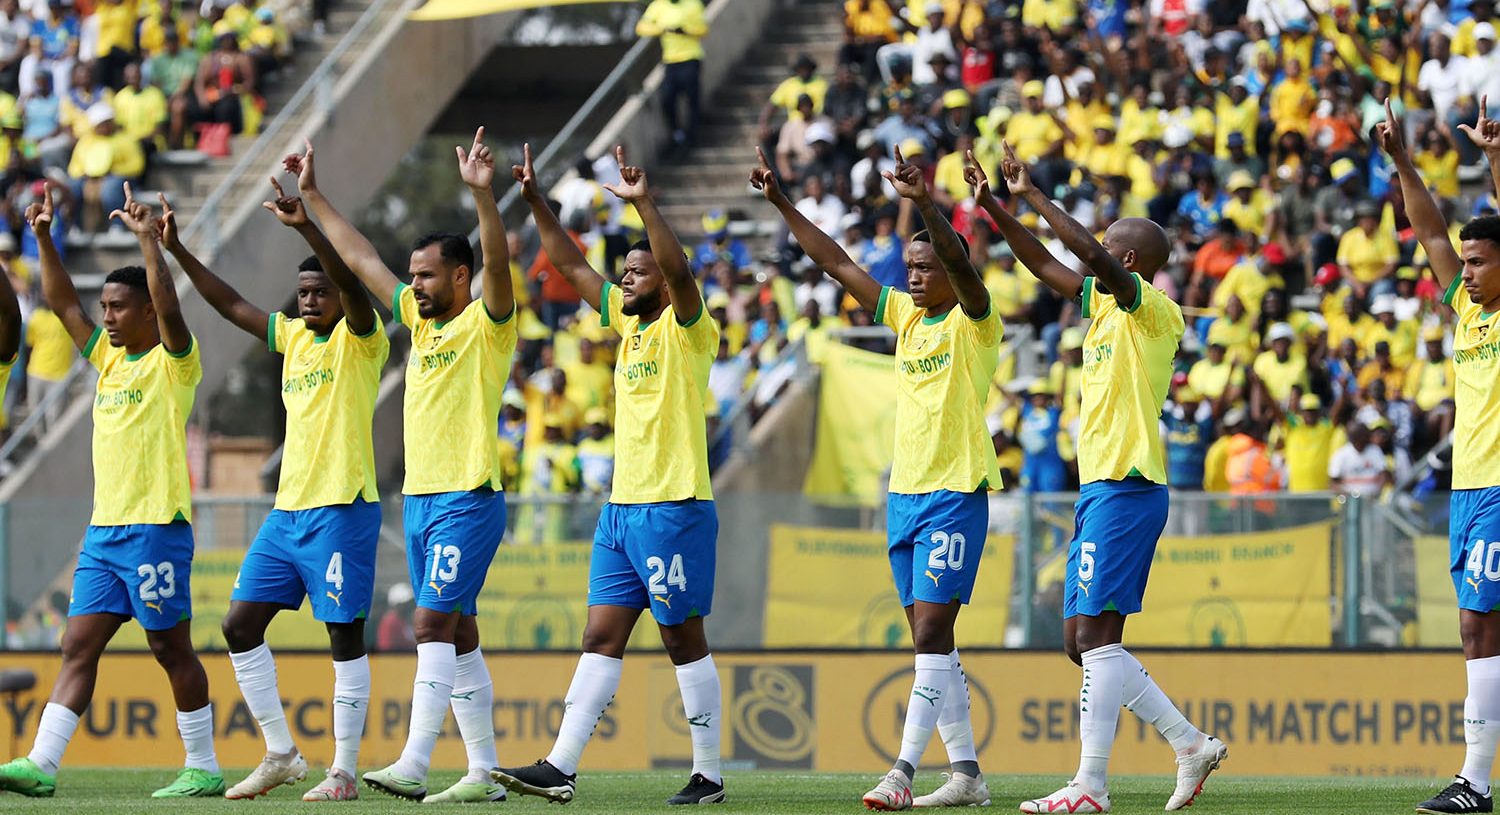 Sundowns secure revenge and top spot with win over Mazembe